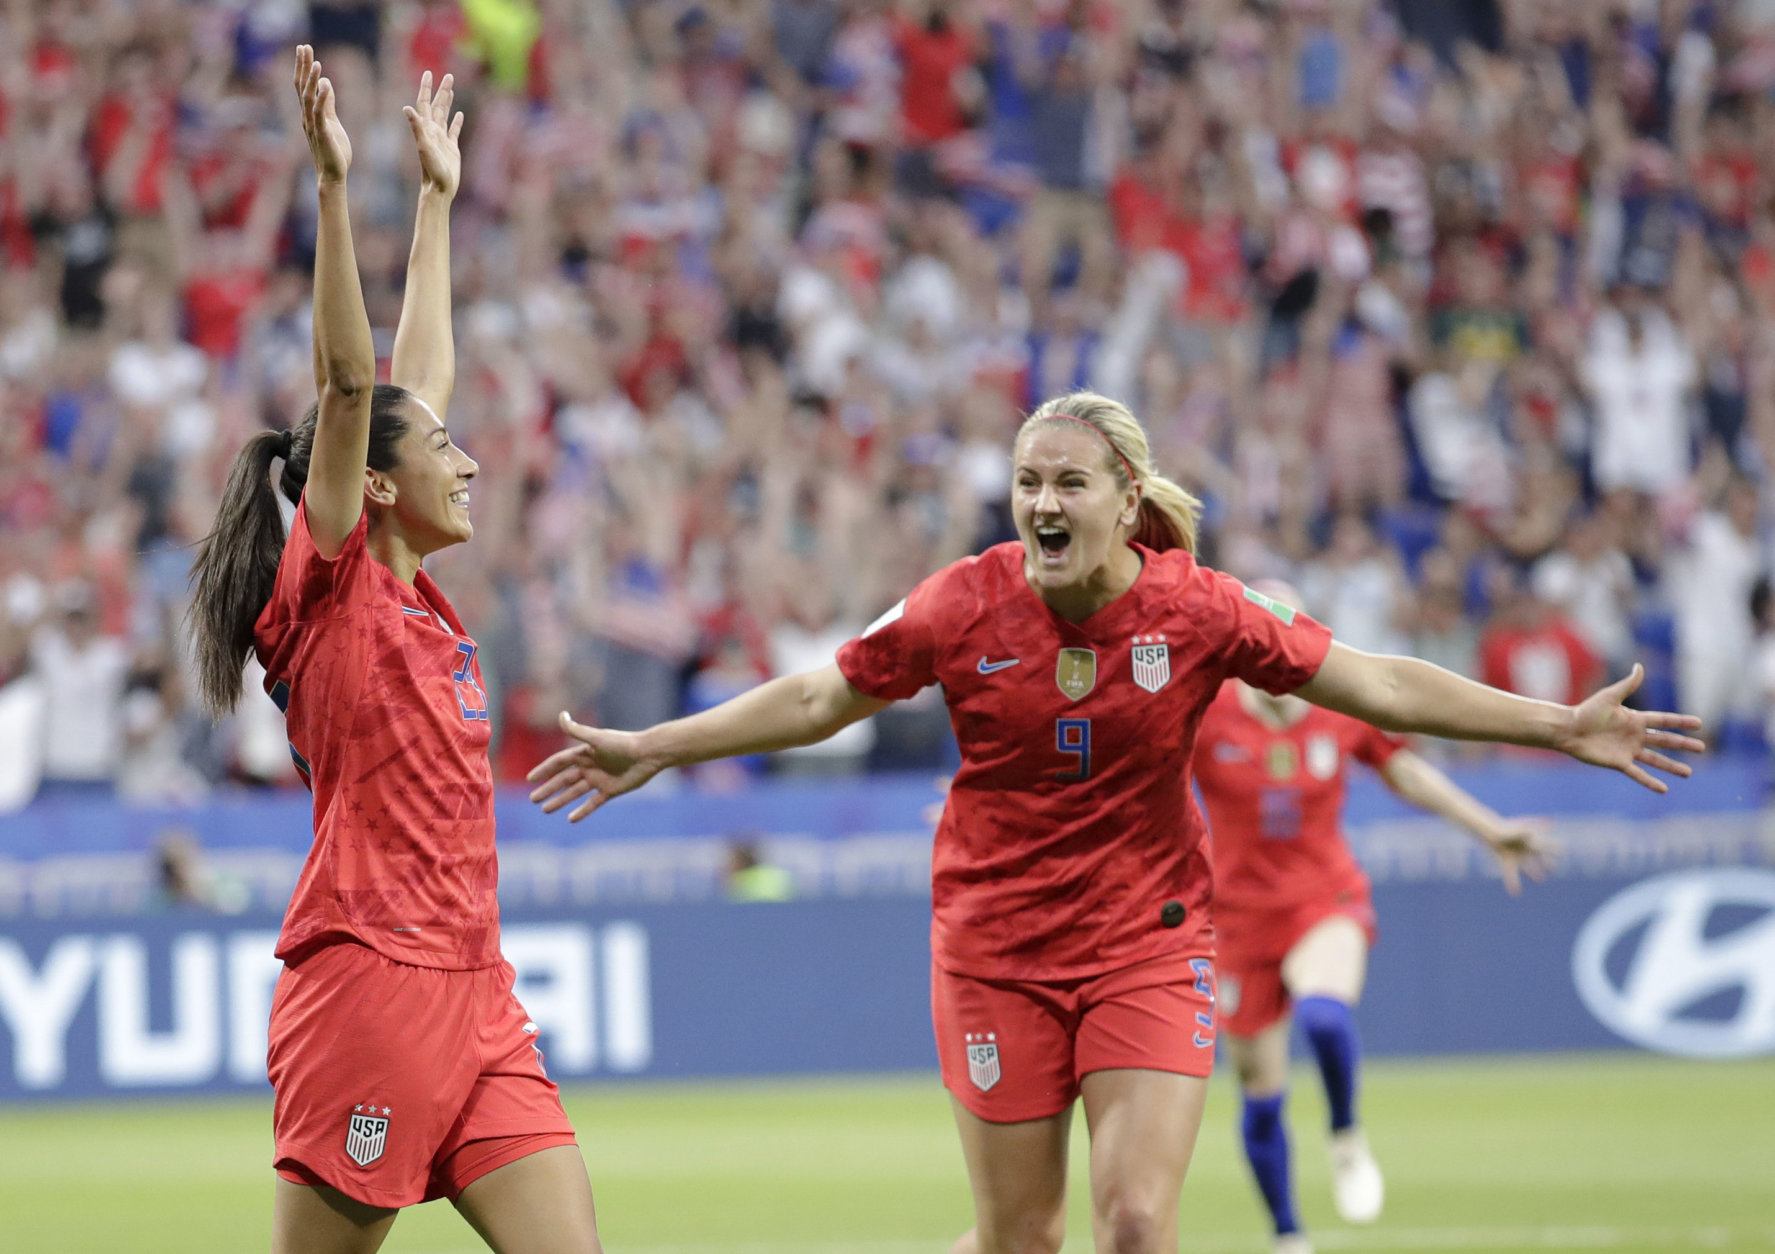 United States' Christen Press, left, celebrates after scoring her side's first goal during the Women's World Cup semifinal soccer match between England and the United States, at the Stade de Lyon, outside Lyon, France, Tuesday, July 2, 2019. (AP Photo/Alessandra Tarantino)